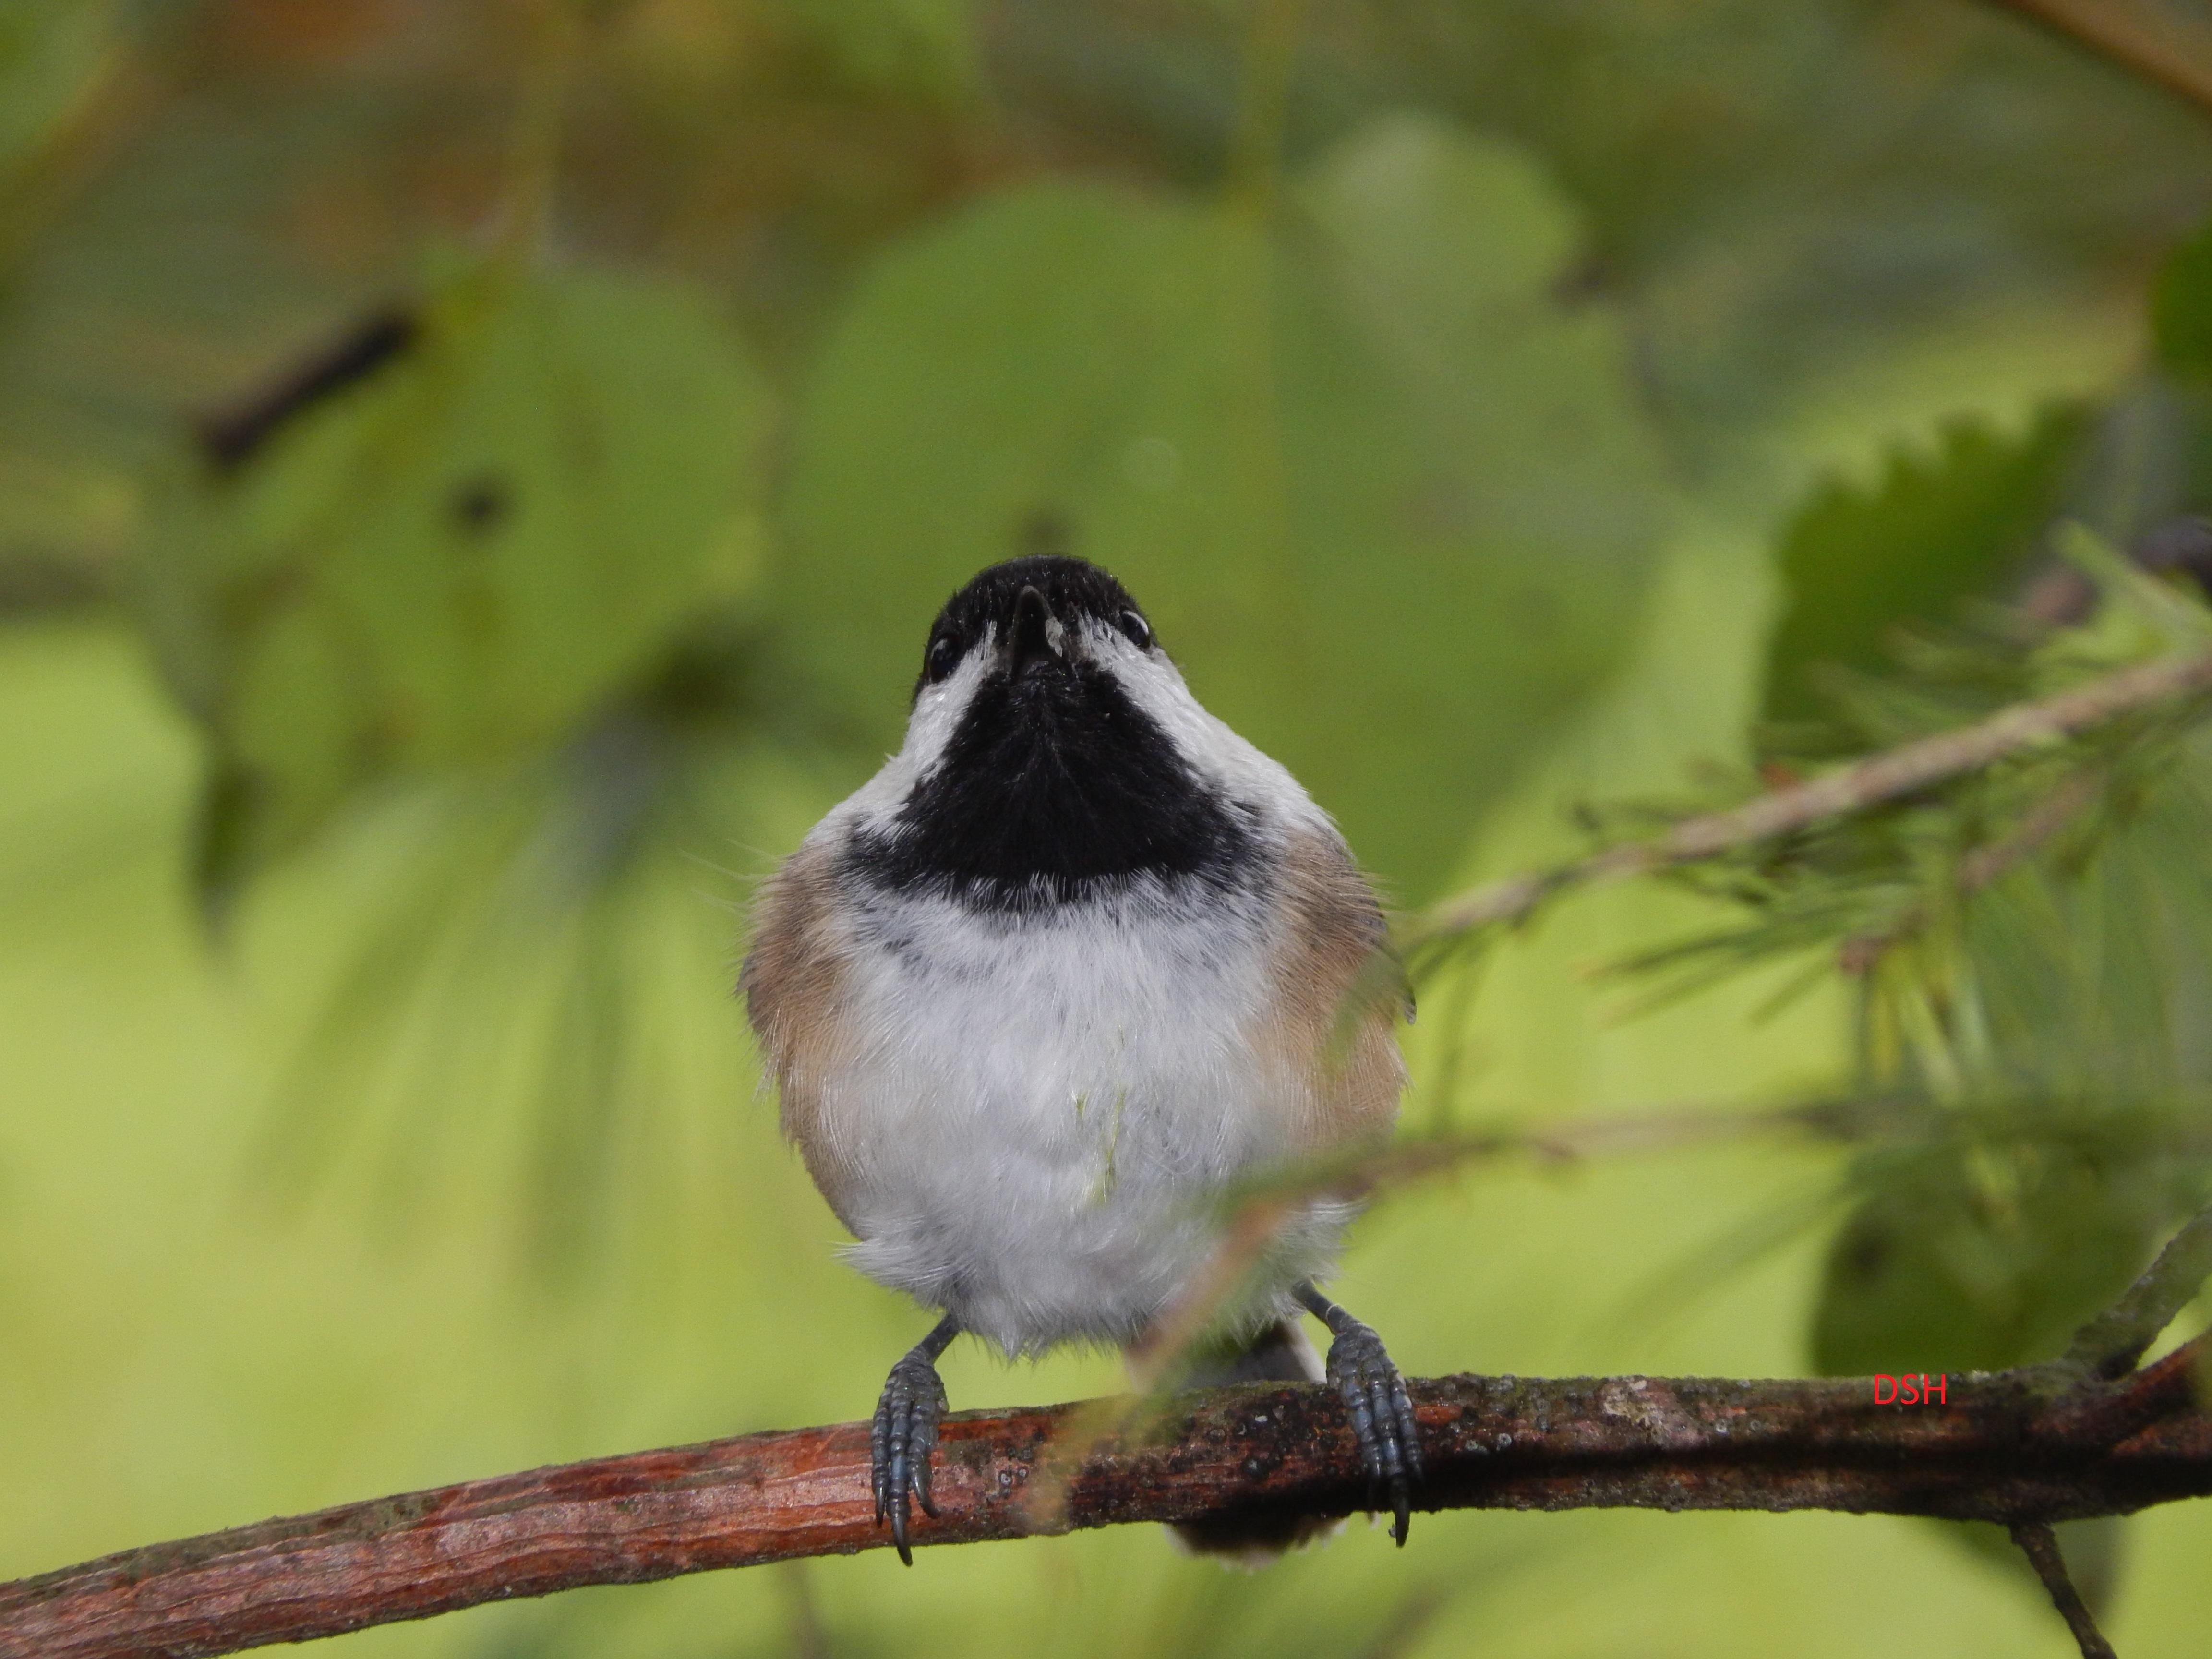 This chickadee was yelling at me, so I captured an unflattering photo of him mid-chirp and now shaming him on the internet